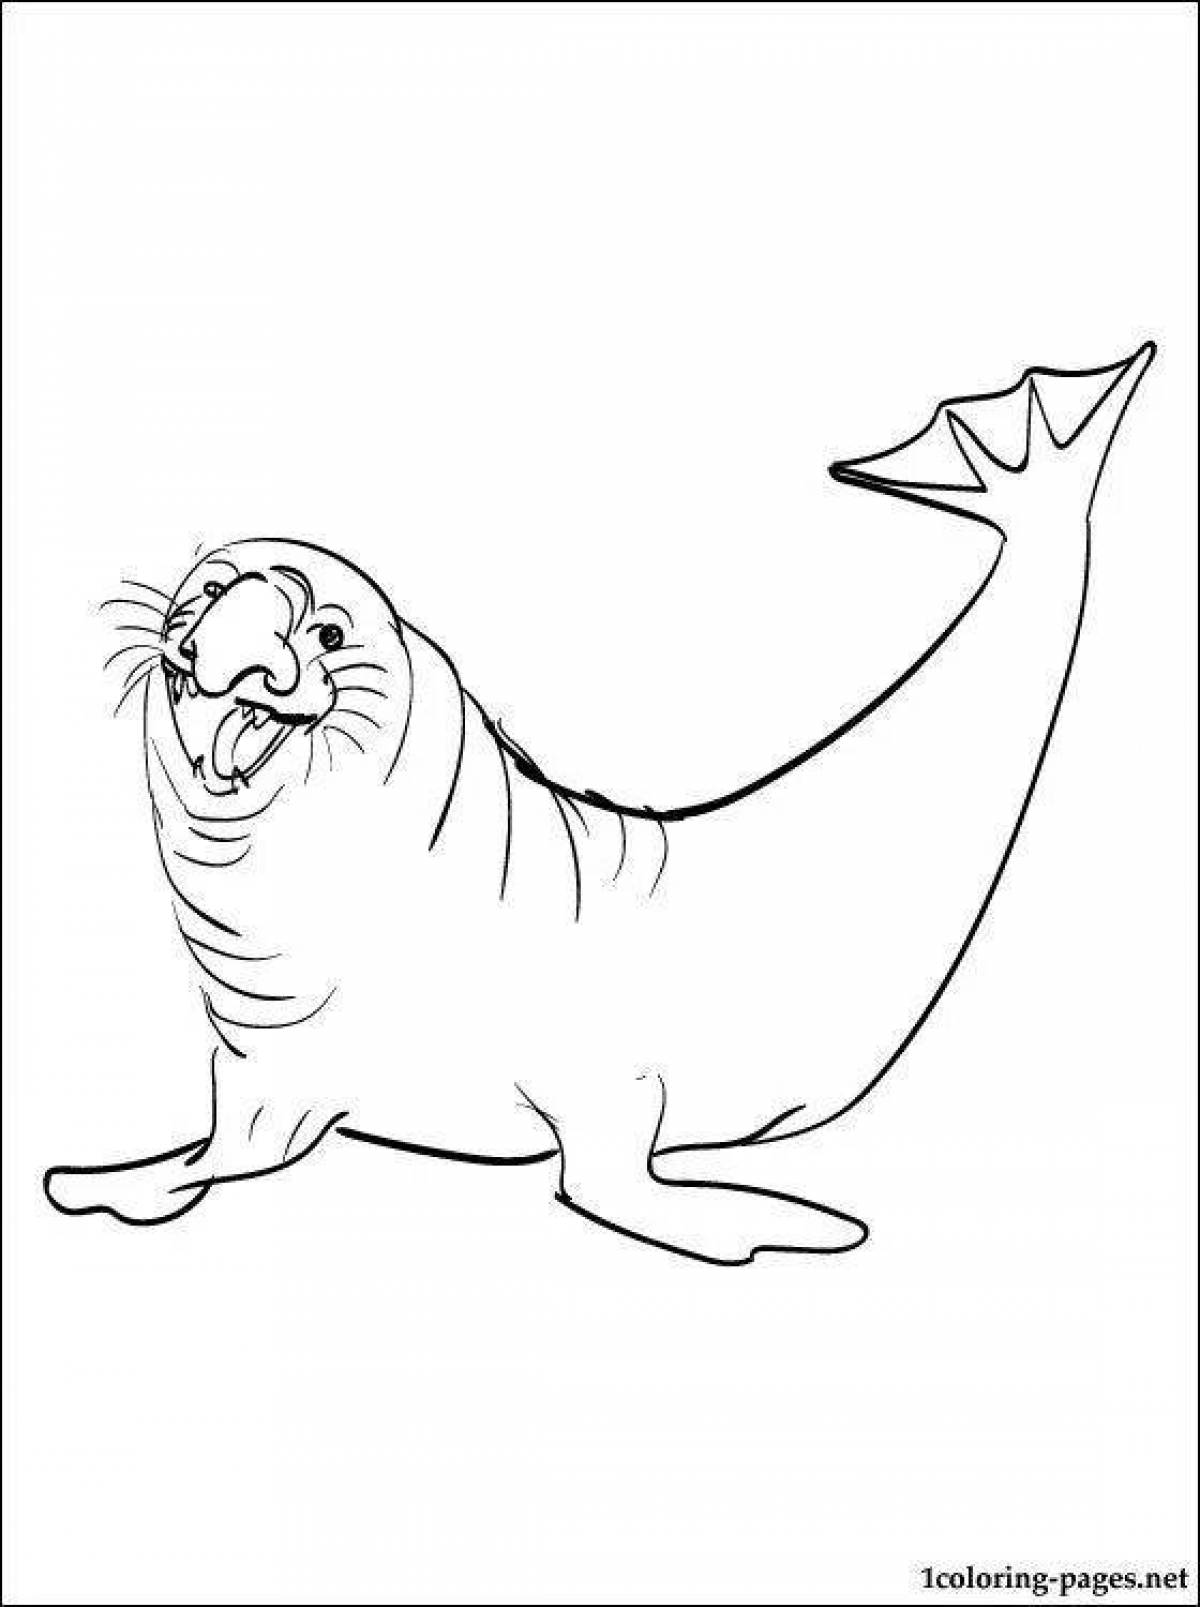 Fabulous elephant seal coloring page